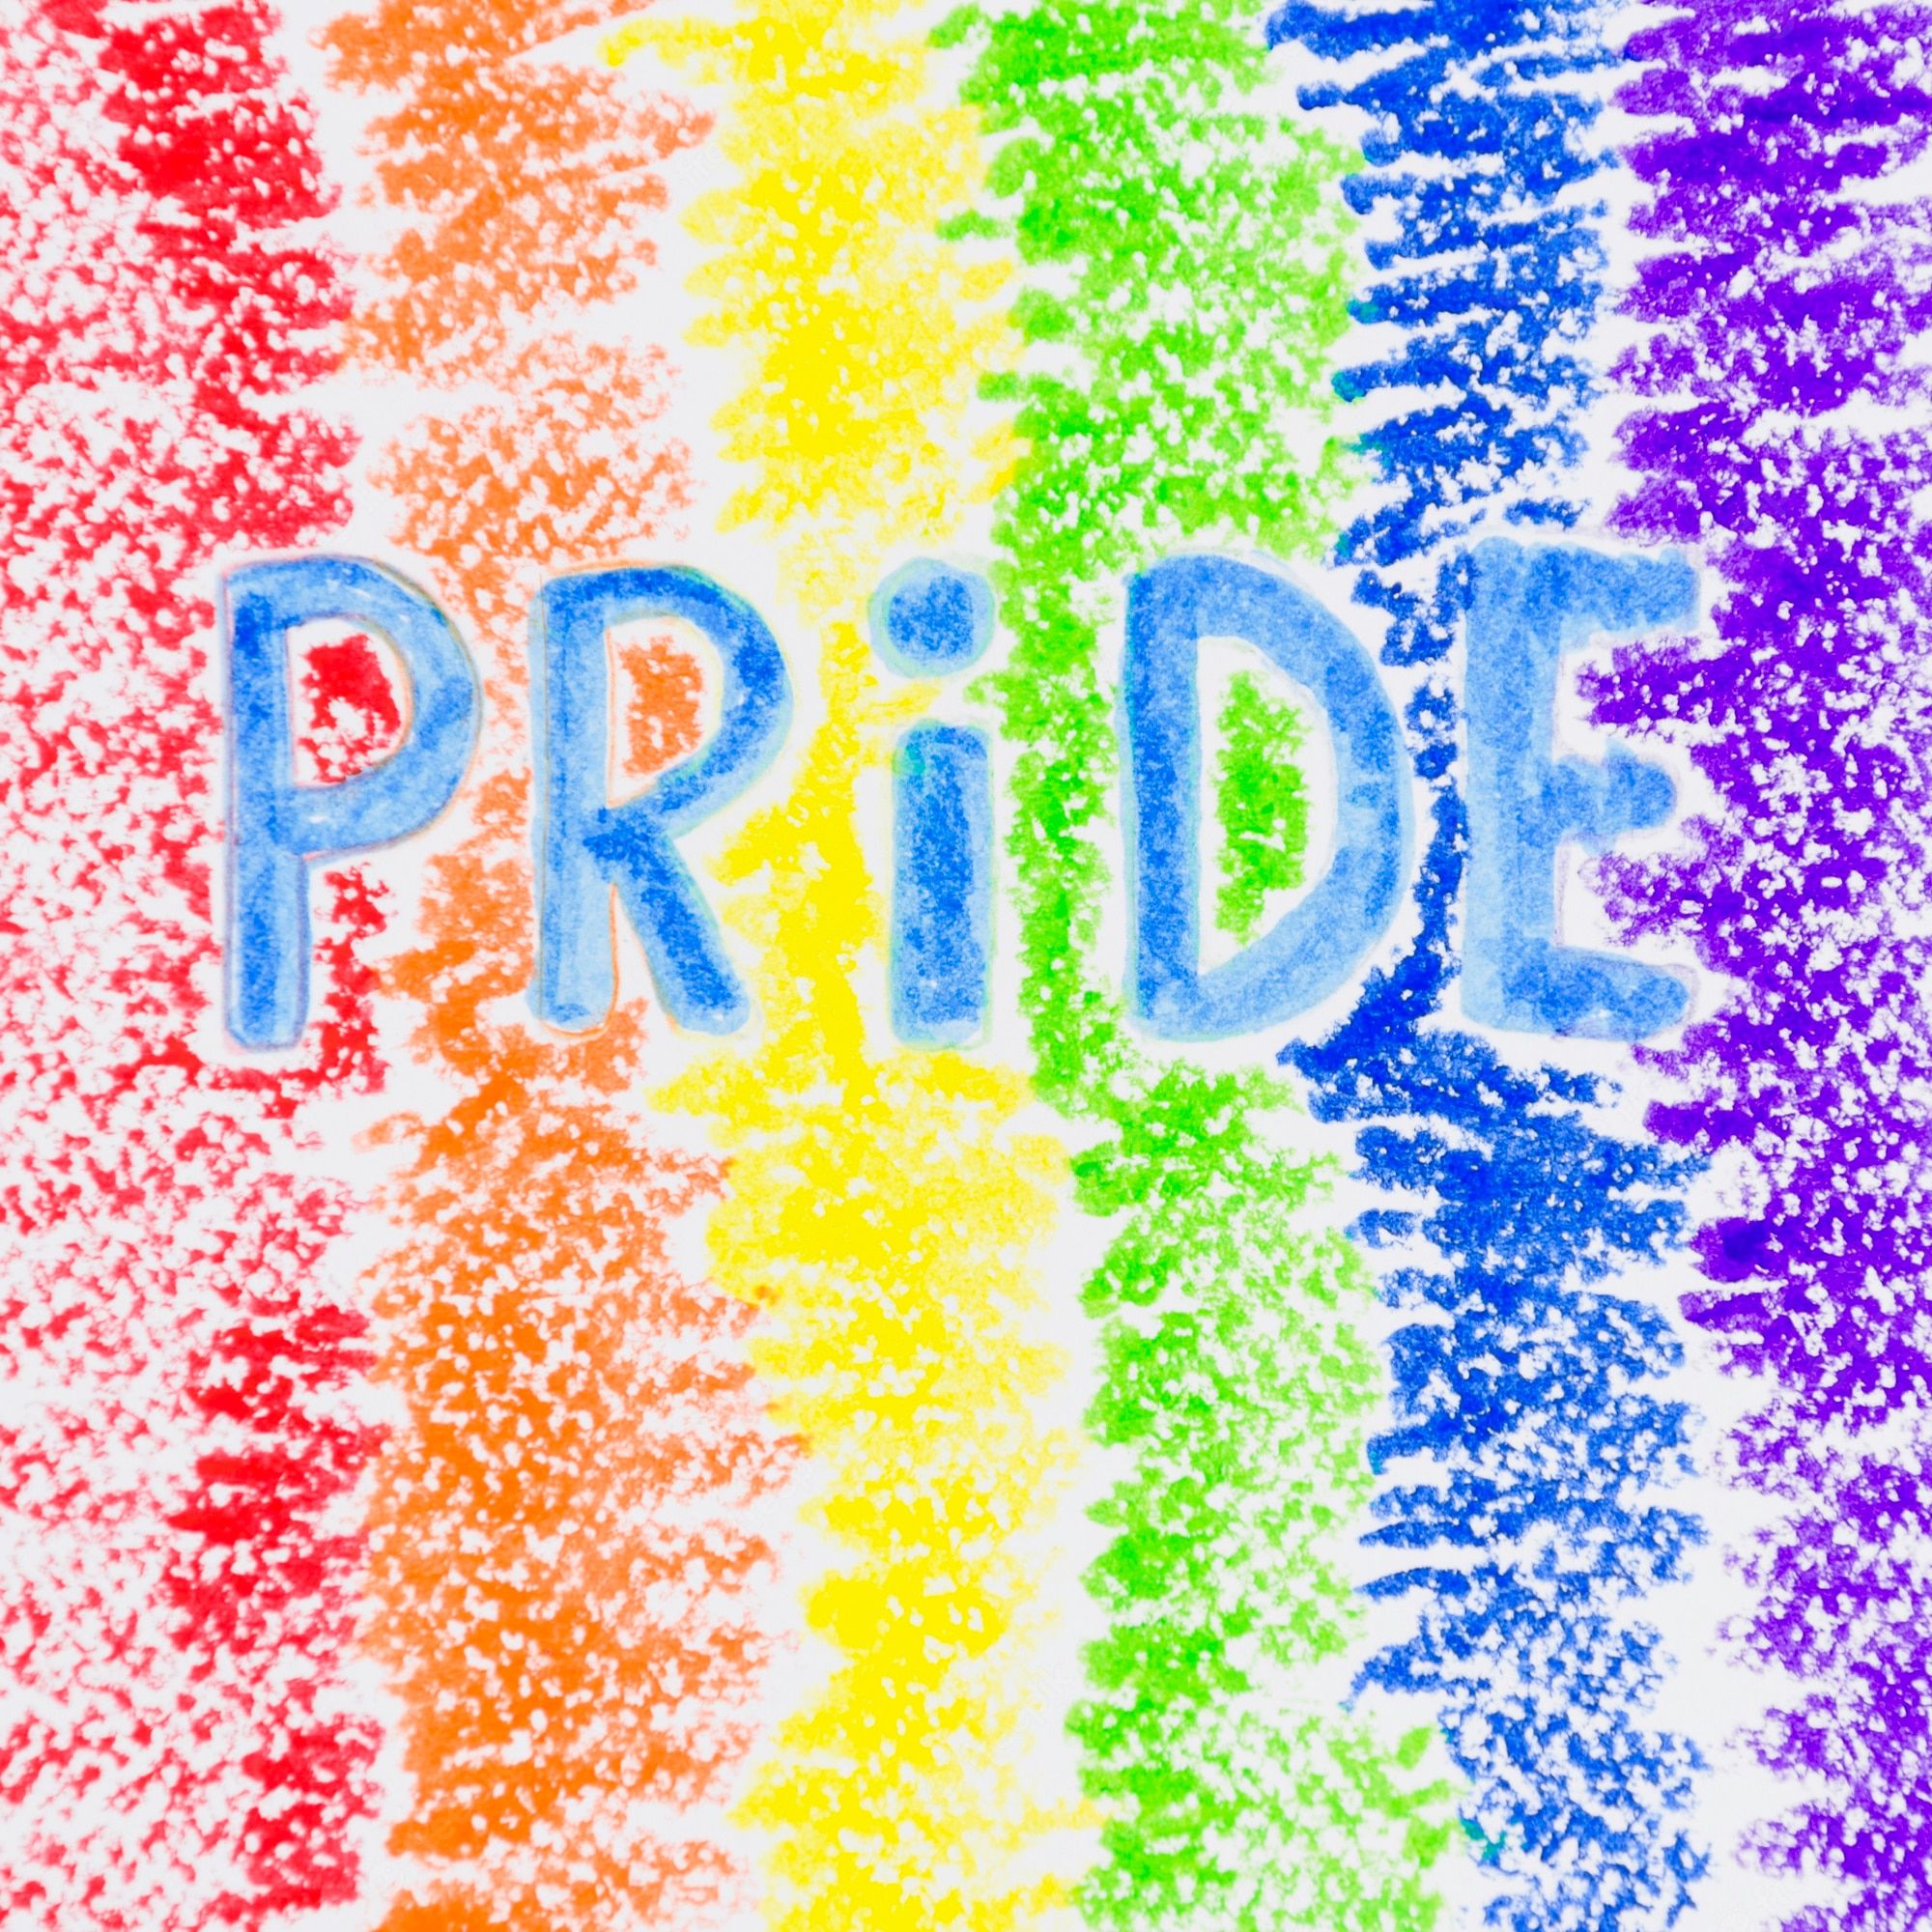 A rainbow colored drawing with the word pride written in blue - Pride